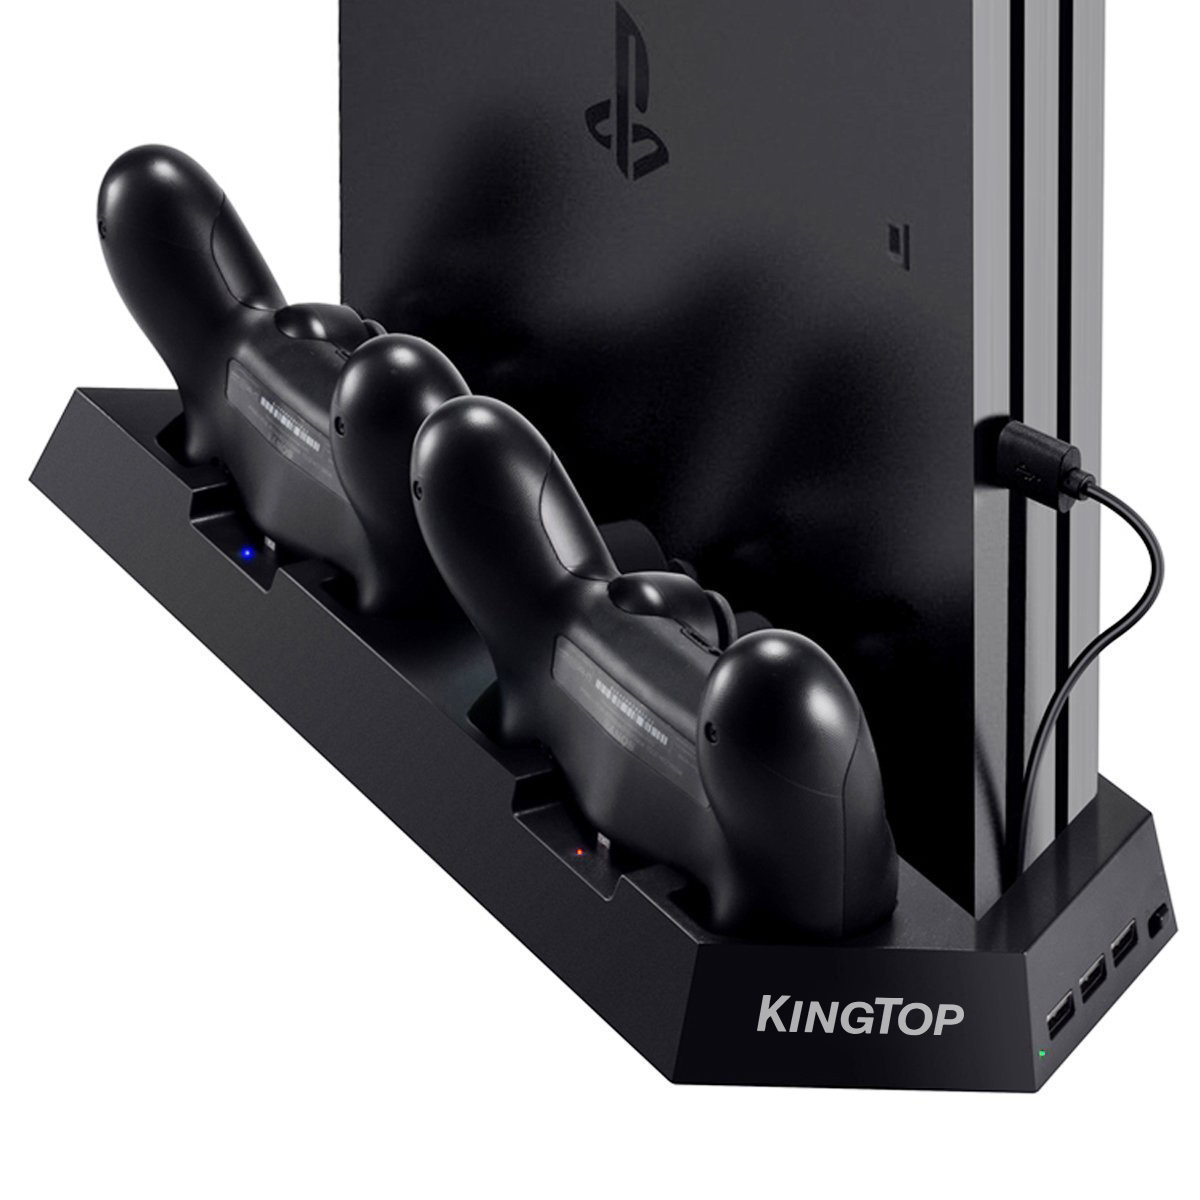 KINGTOP UPDATED Vertical Stand Charger for PS4 / PS4 Pro / PS4 Slim